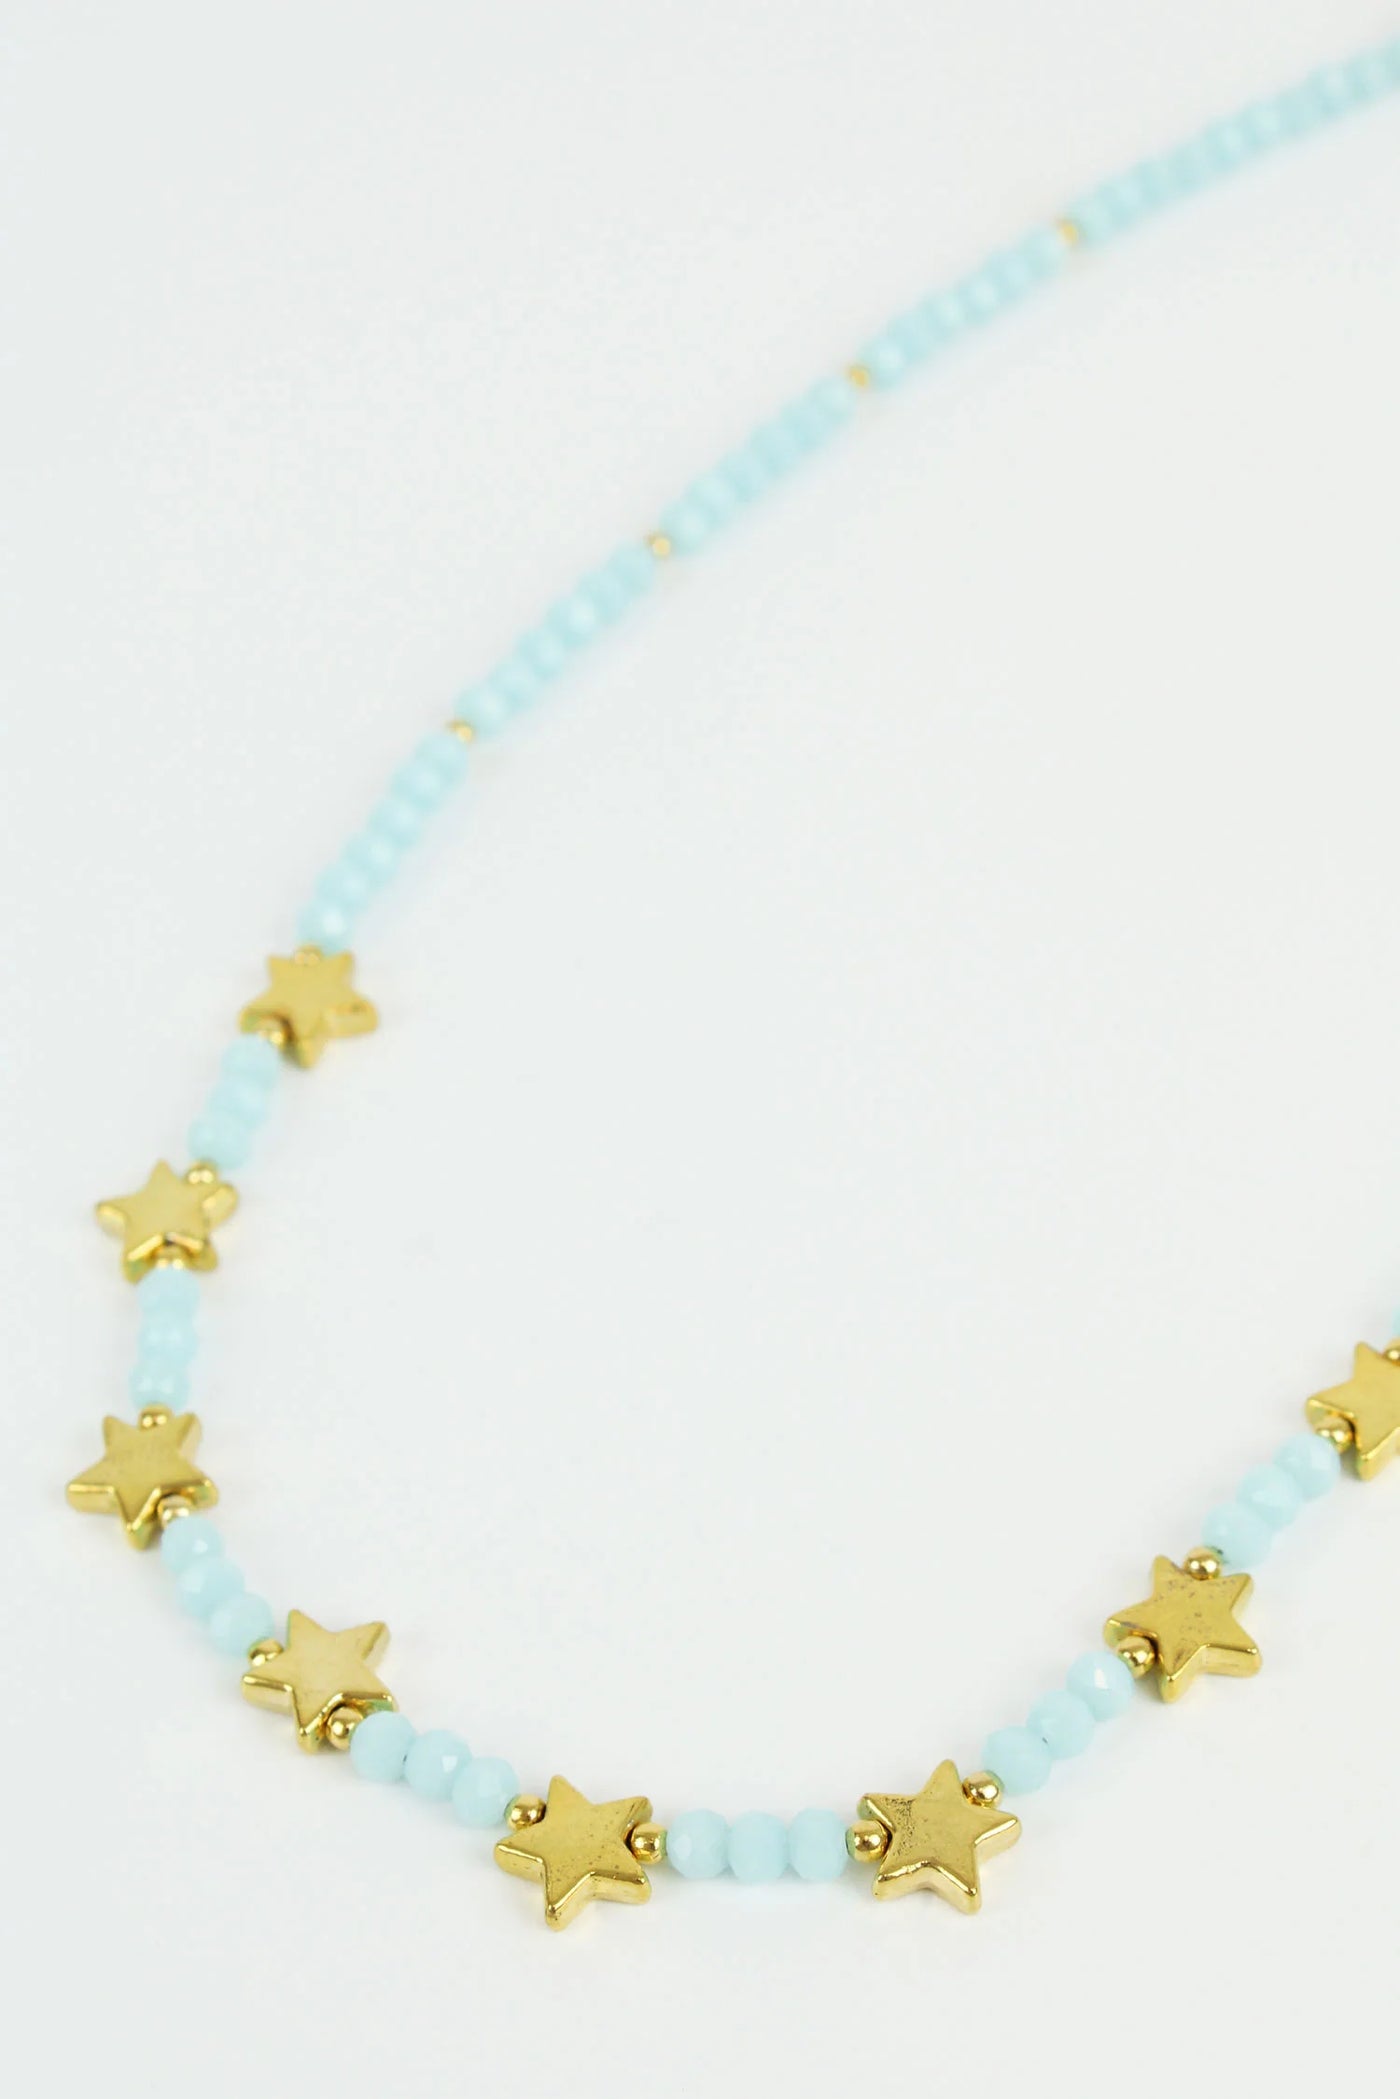 Star bead necklace in in sky blue